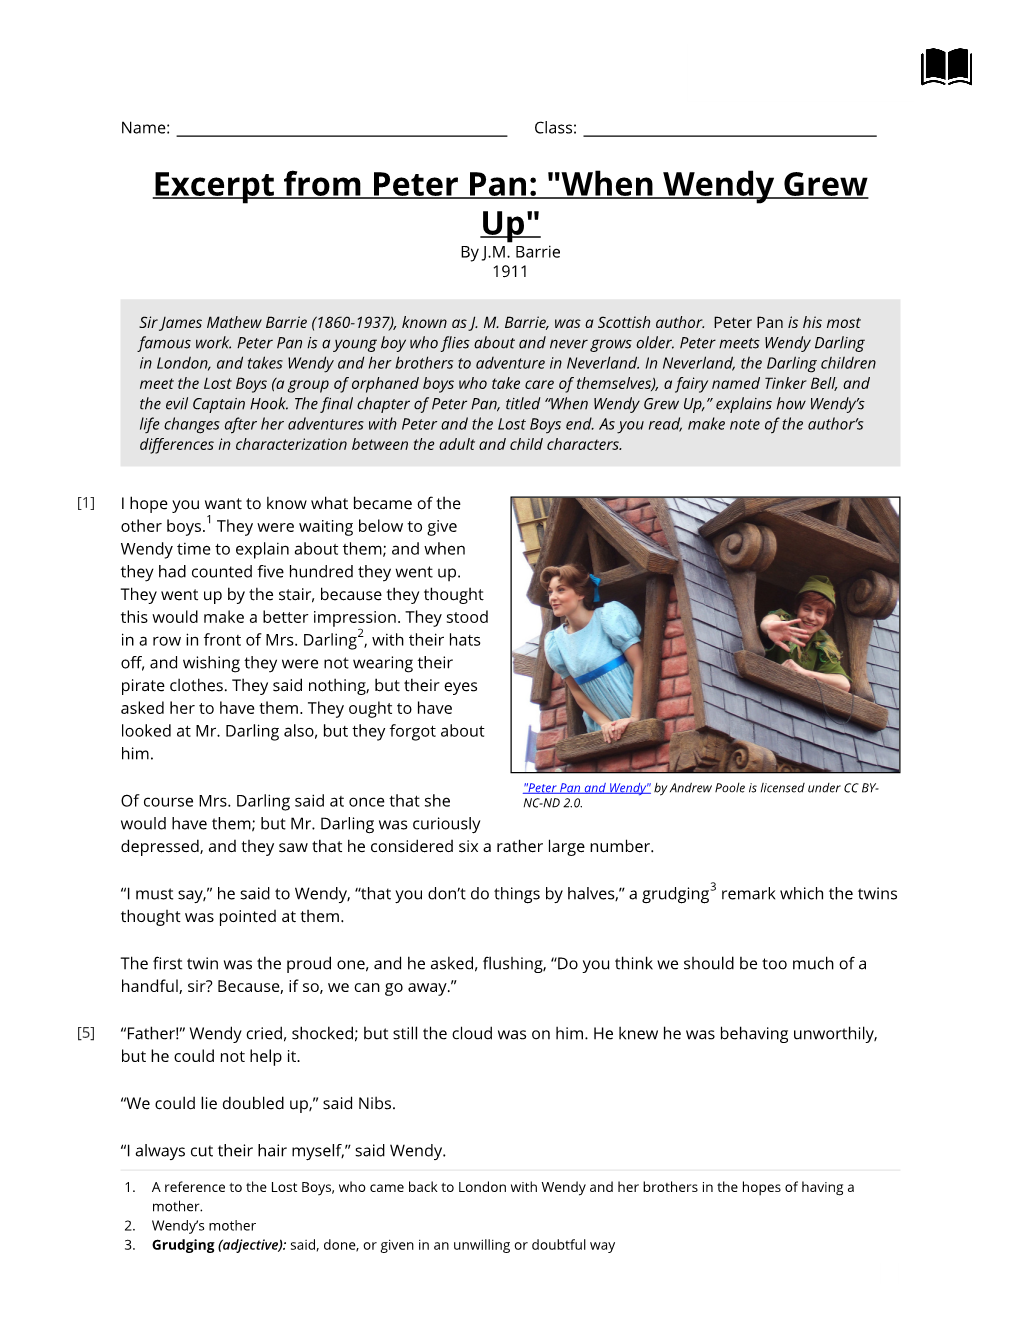 Excerpt from Peter Pan: "When Wendy Grew Up" by J.M